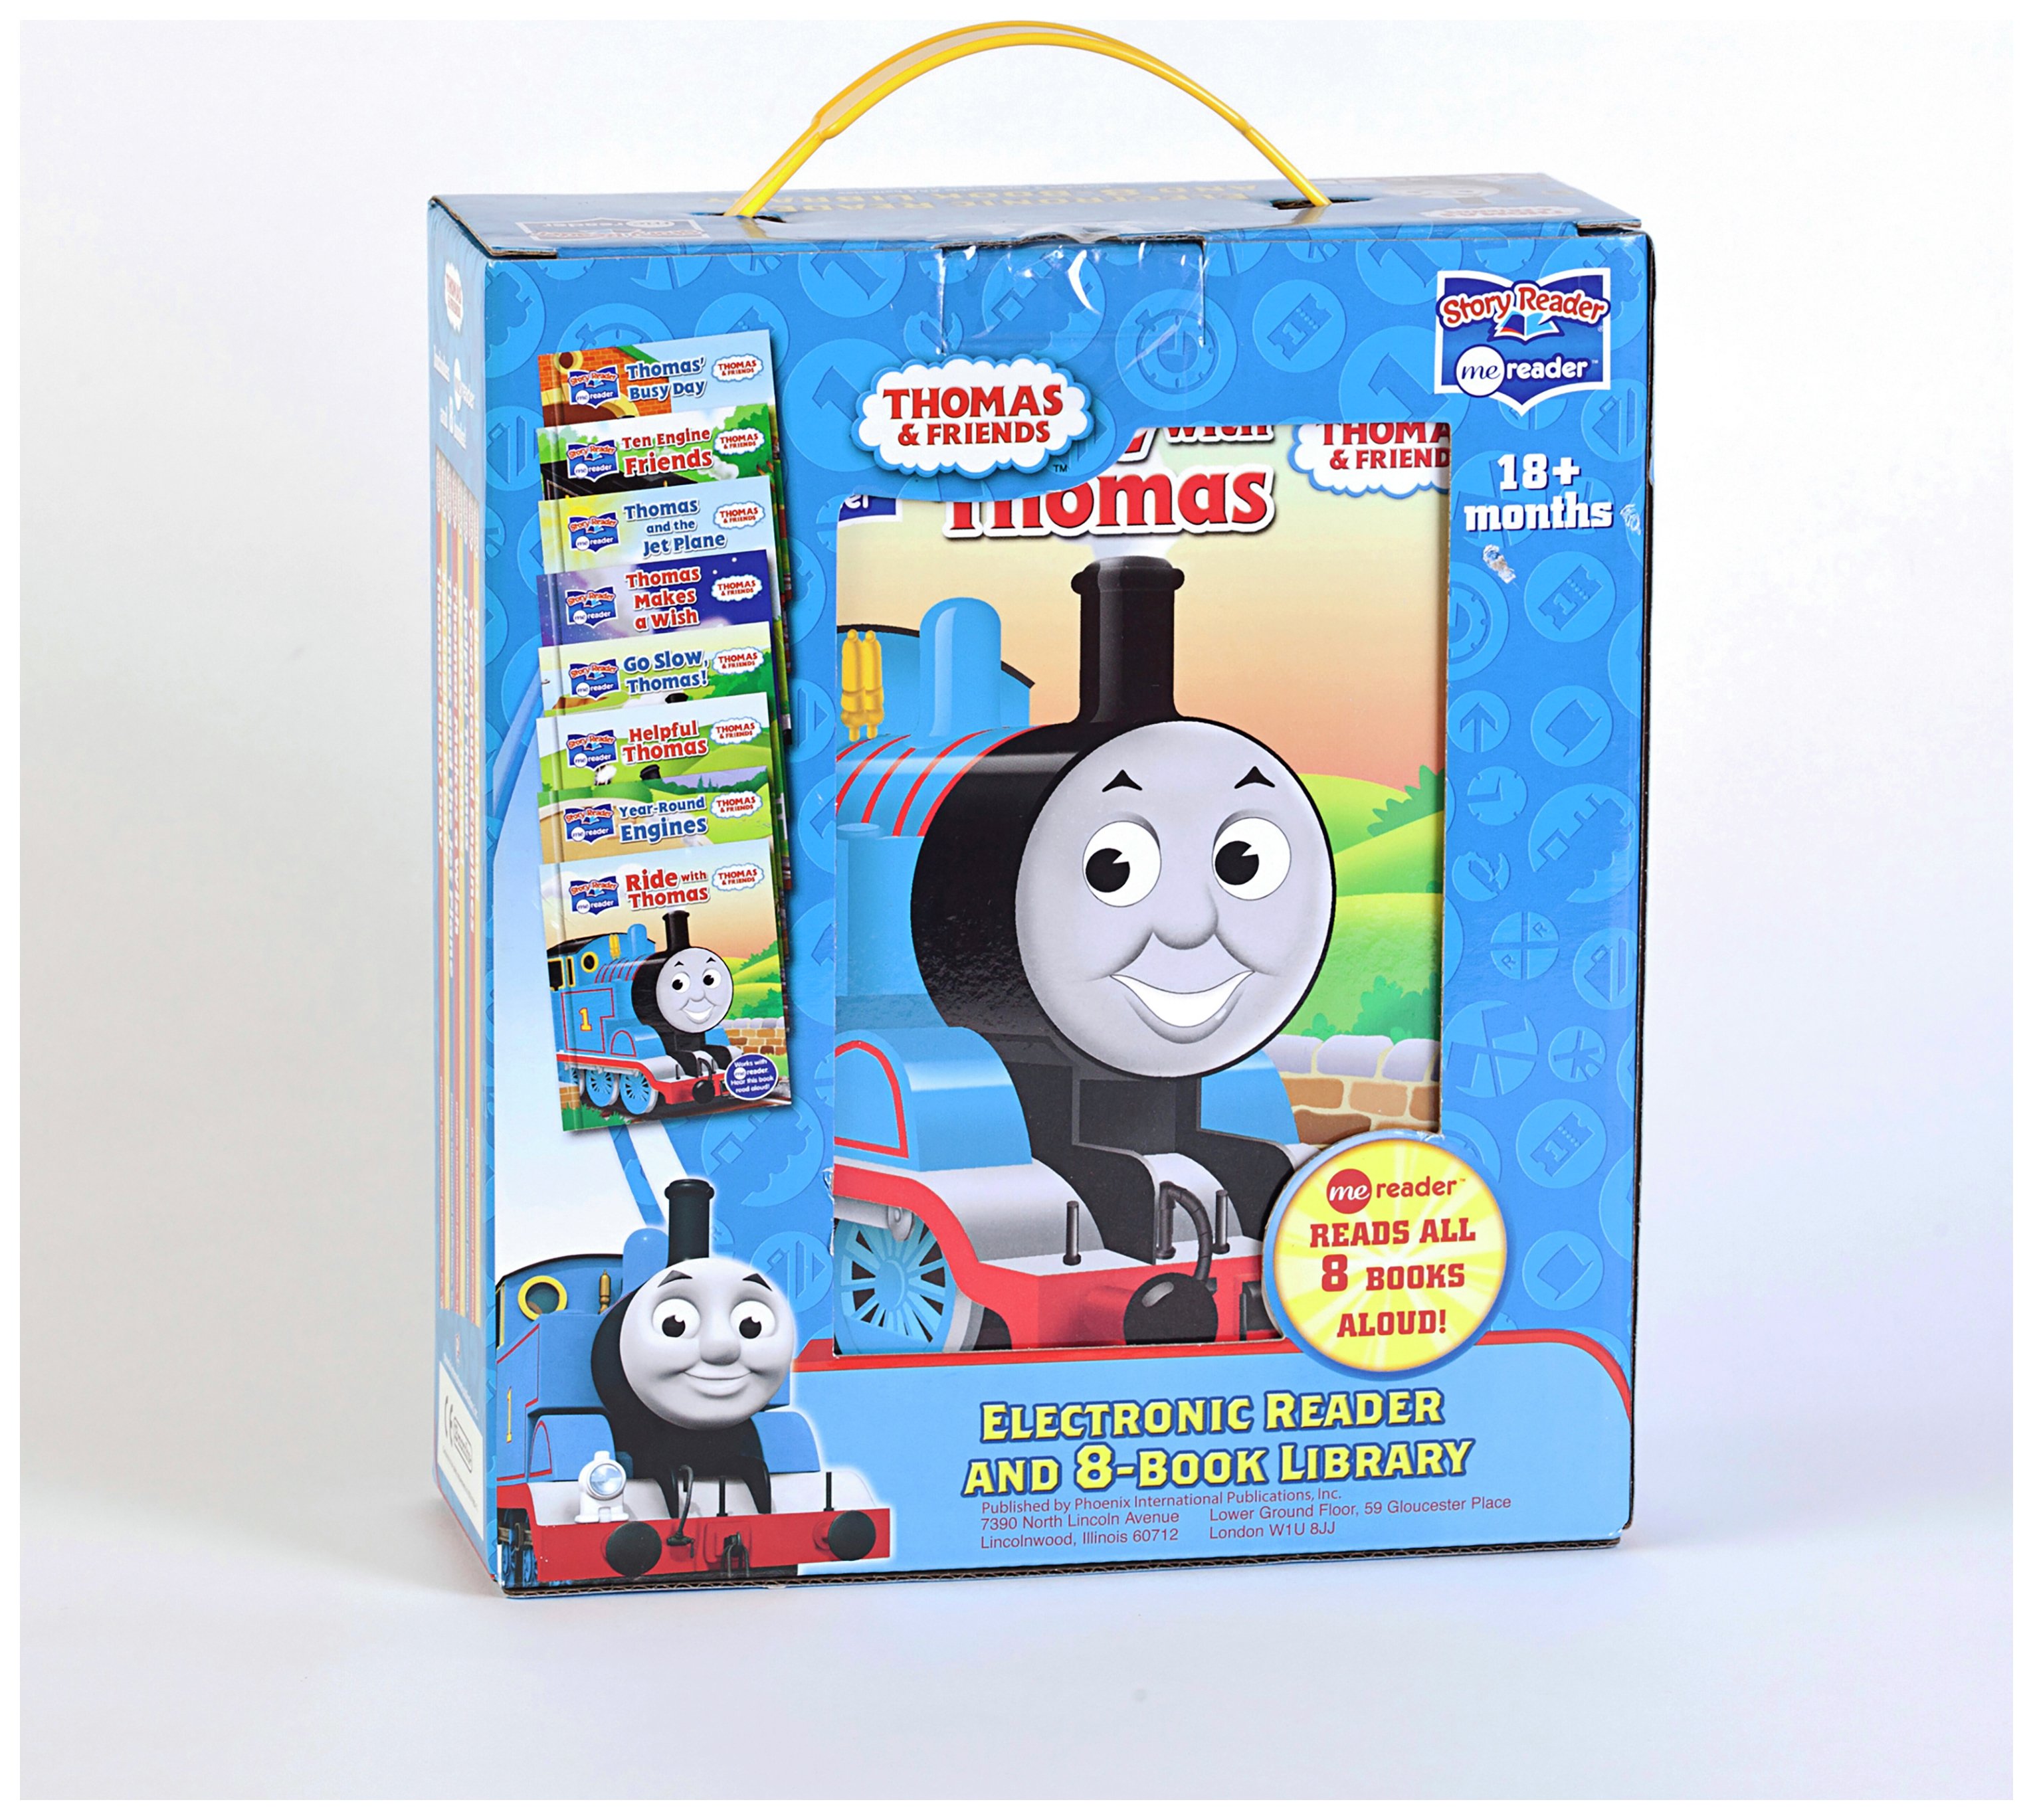 Thomas & Friends Electronic Reader.